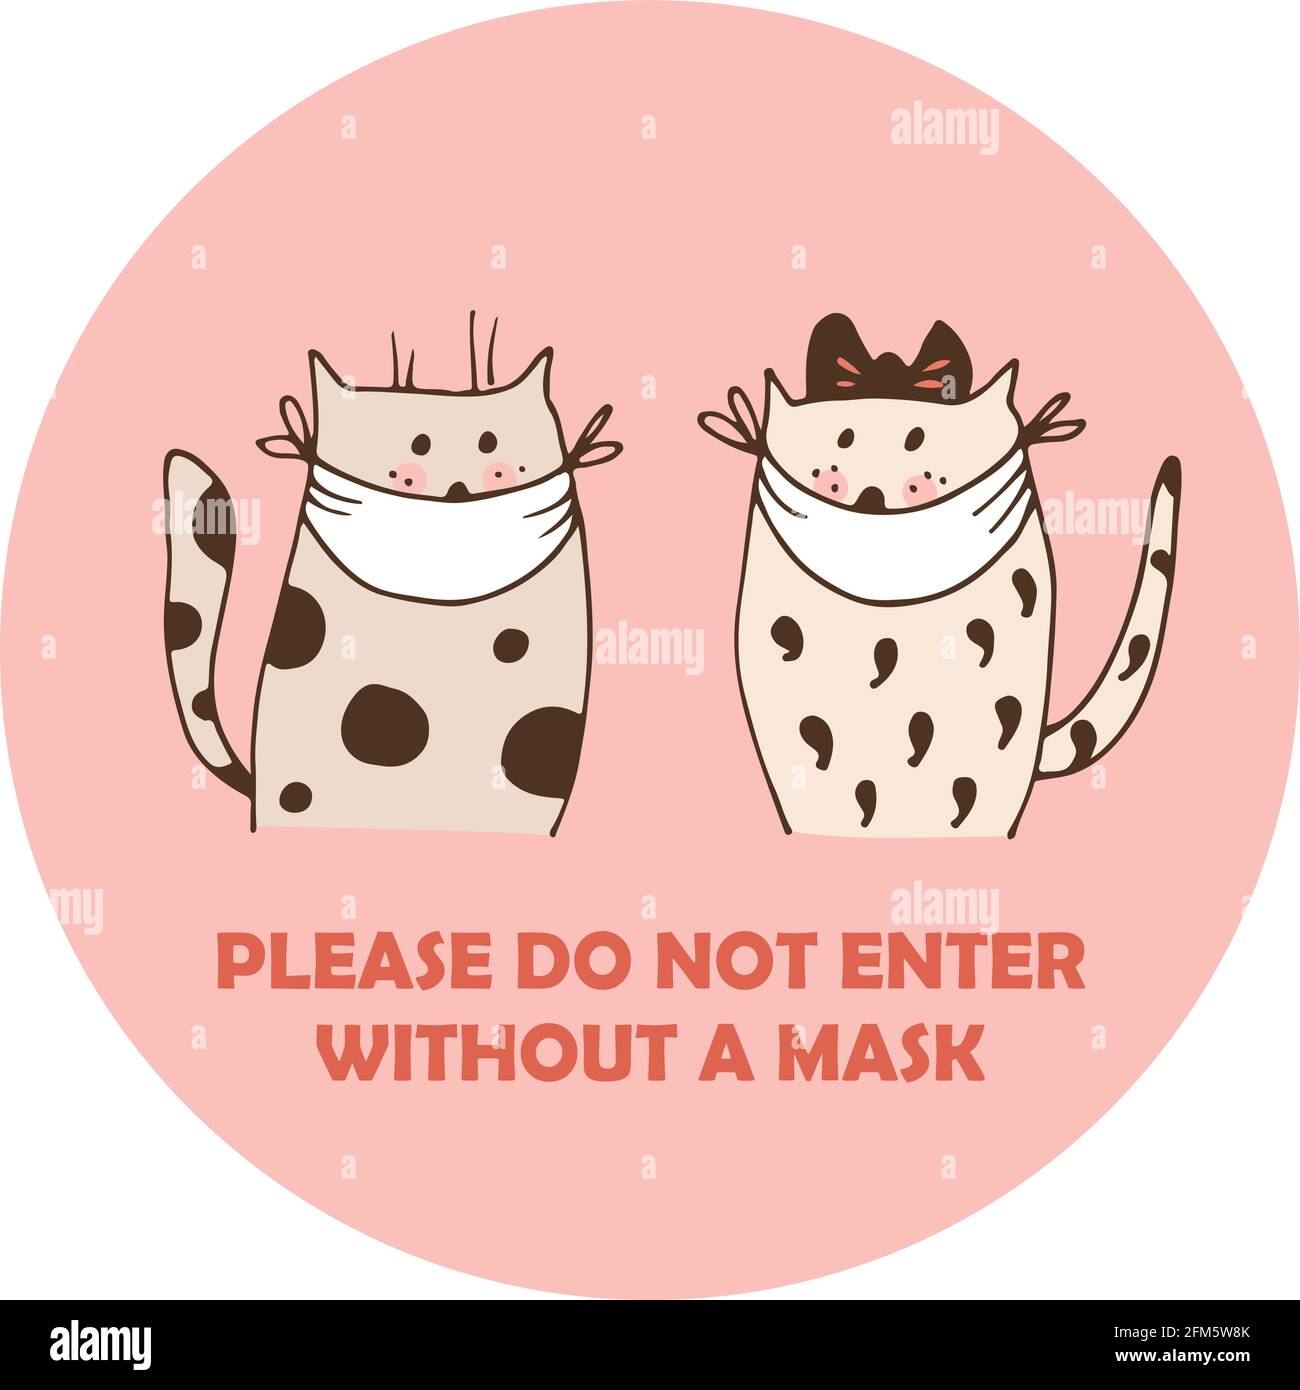 Two cats in face masks vector illustration, isolated on pink background with text Please do not enter without a mask Stock Vector